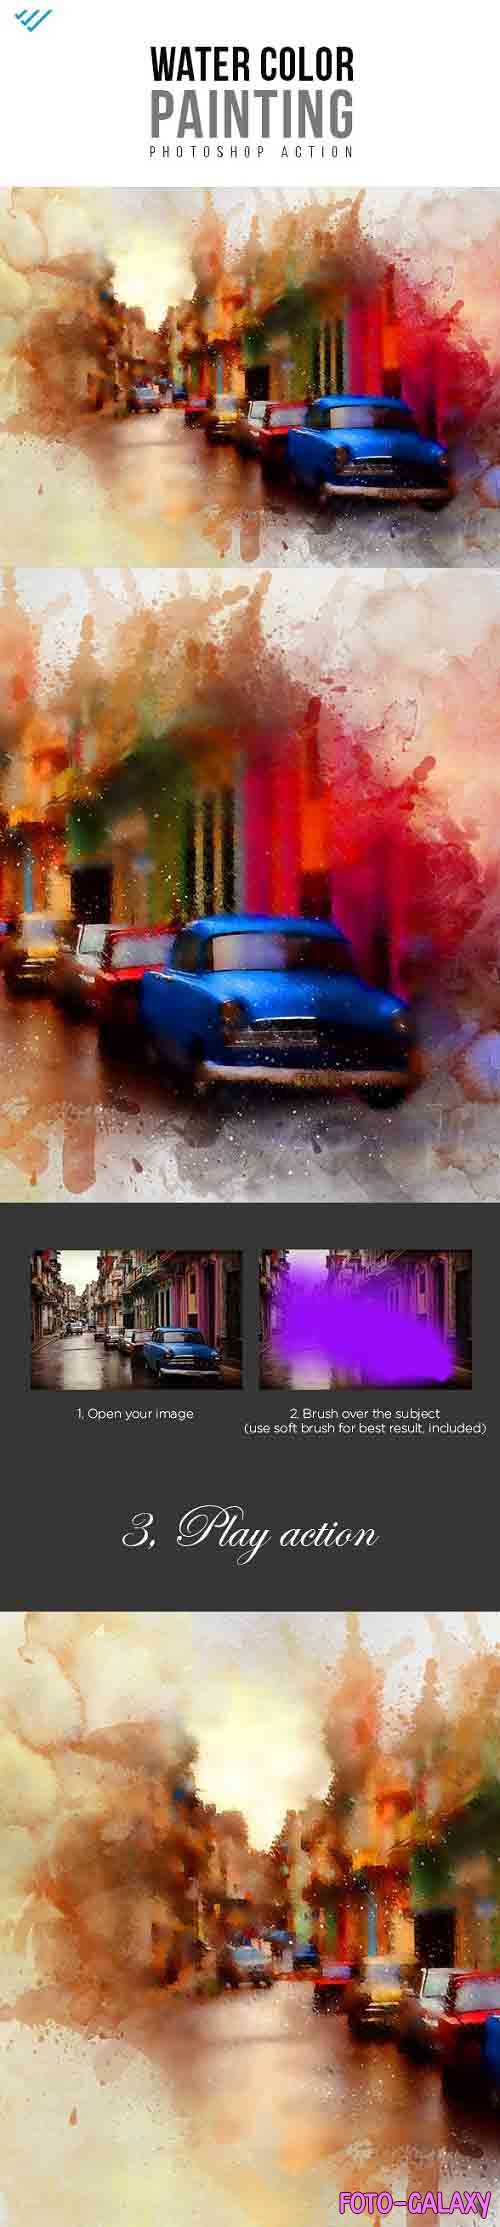 GraphicRiver - Water Color Painting Photoshop Action 18707132